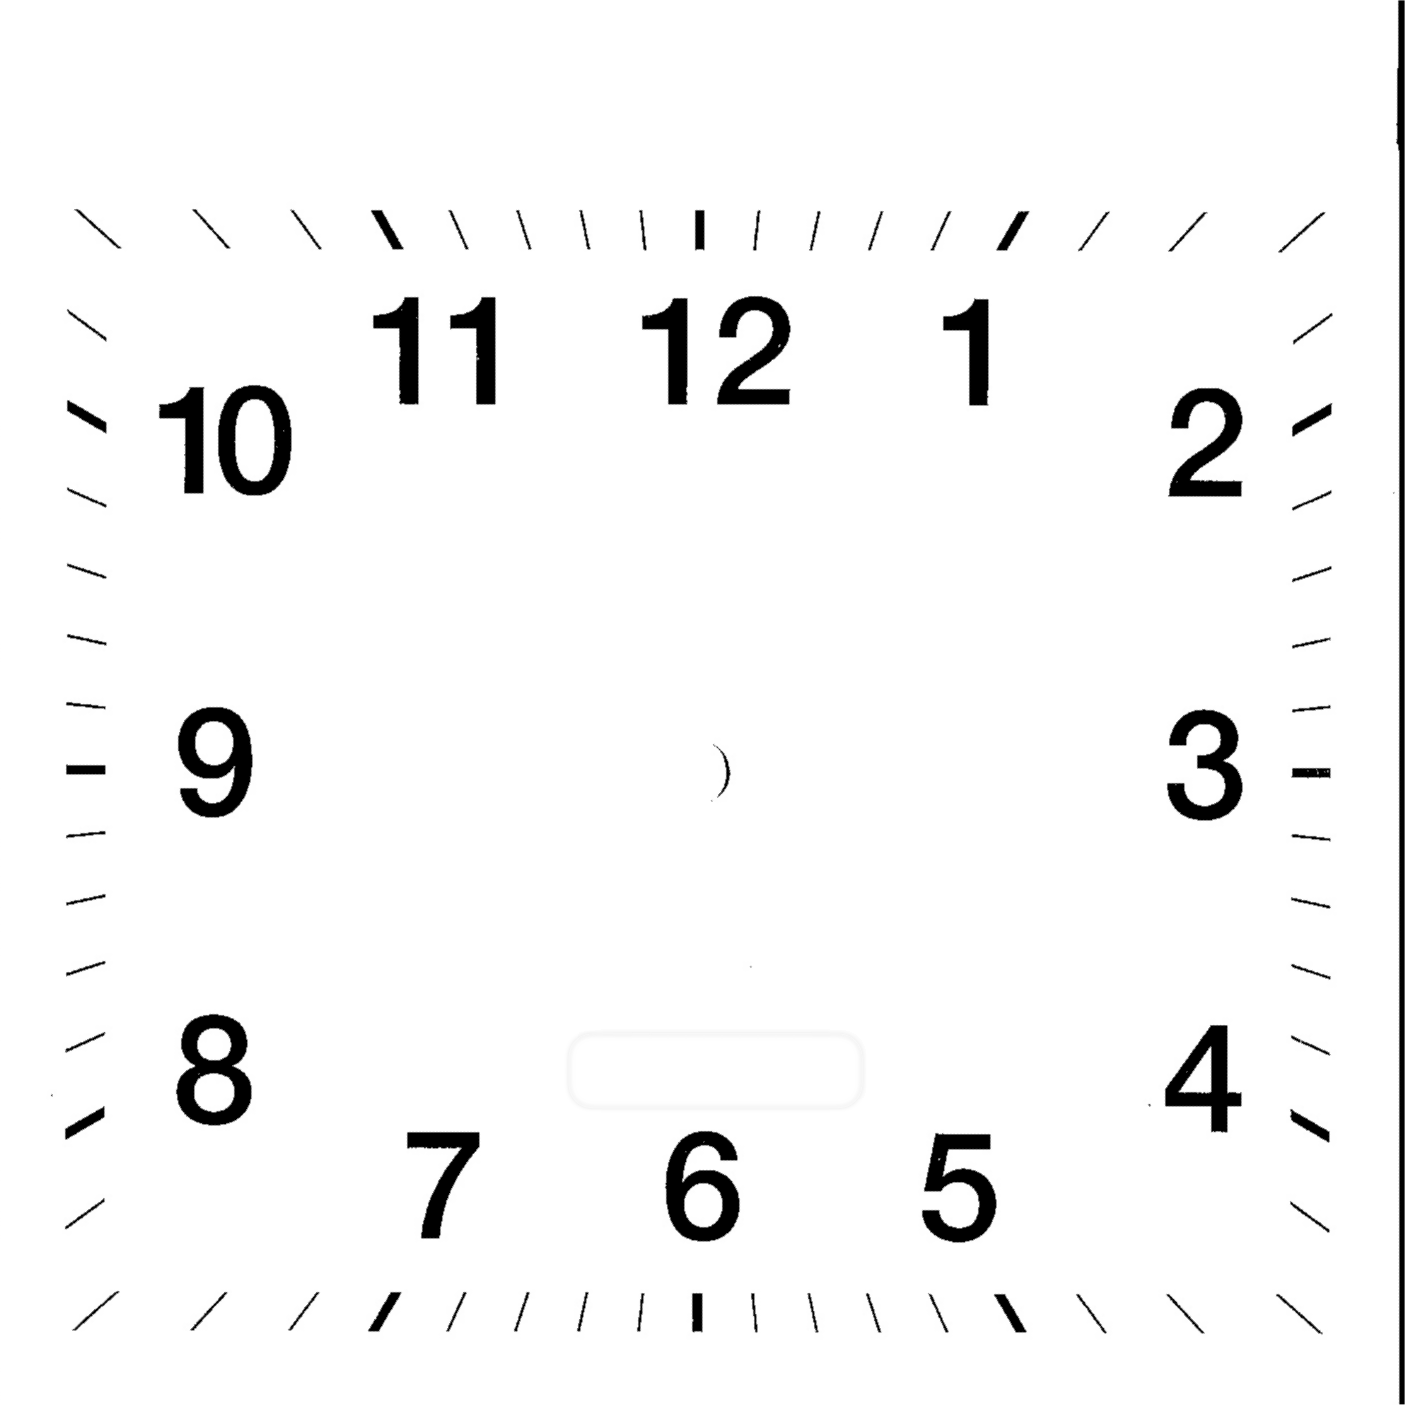 free-clock-templates-download-free-clock-templates-png-images-free